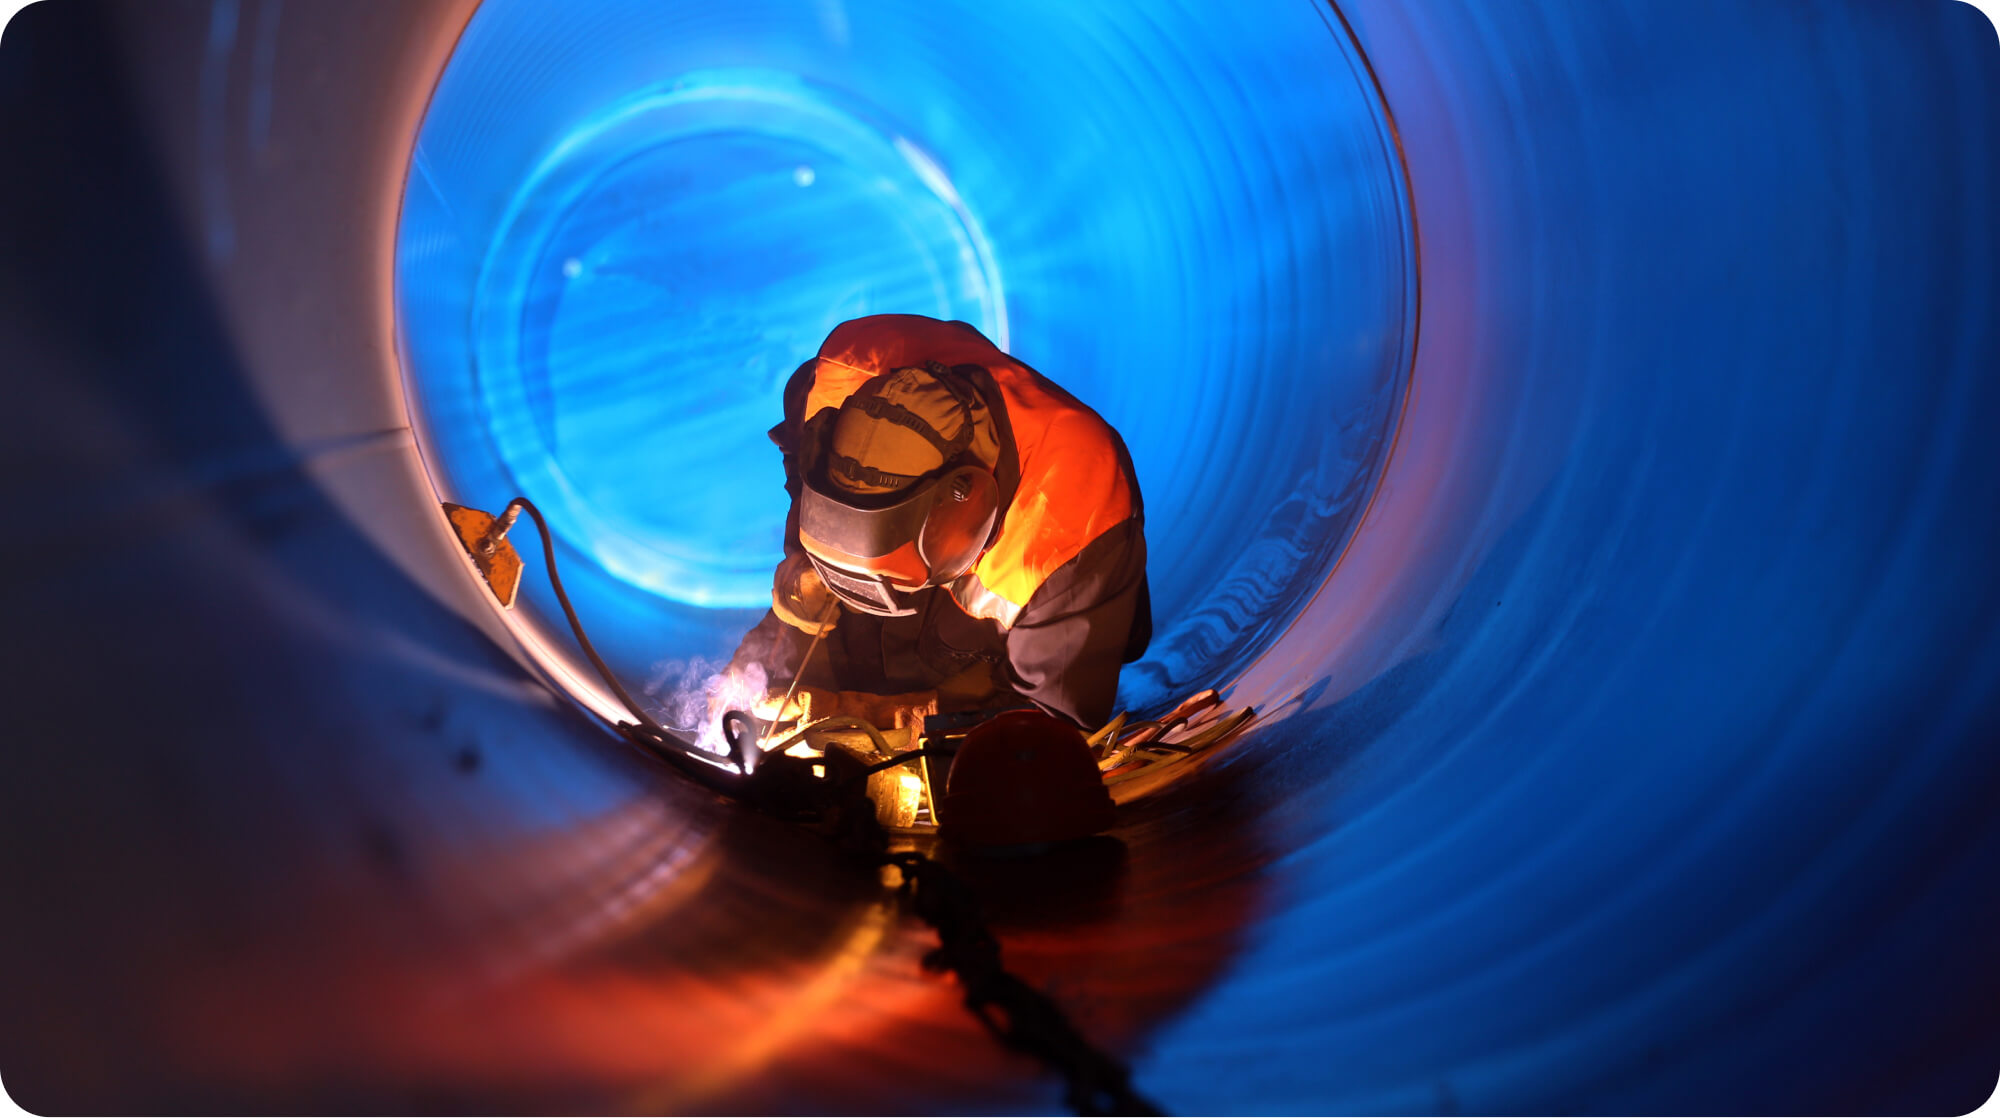 Environmental professional working alone welding in a confined space